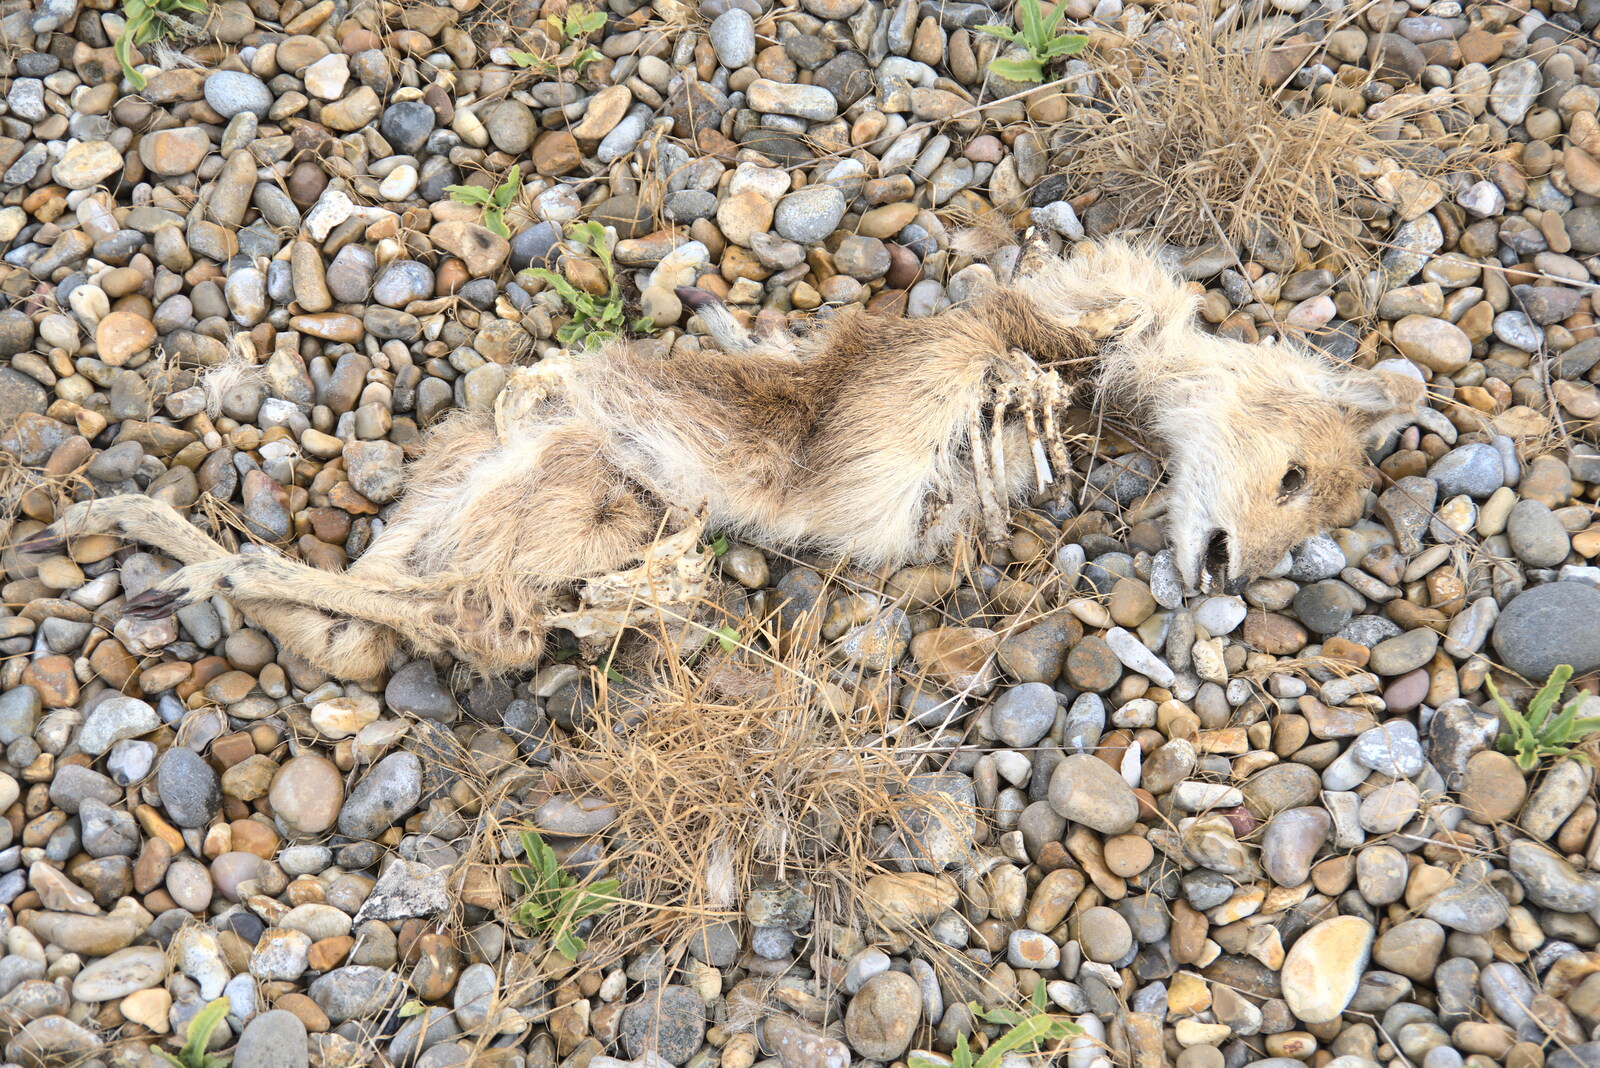 One of several dead tiny deer from A Trip to Orford Ness, Orford, Suffolk - 16th August 2022